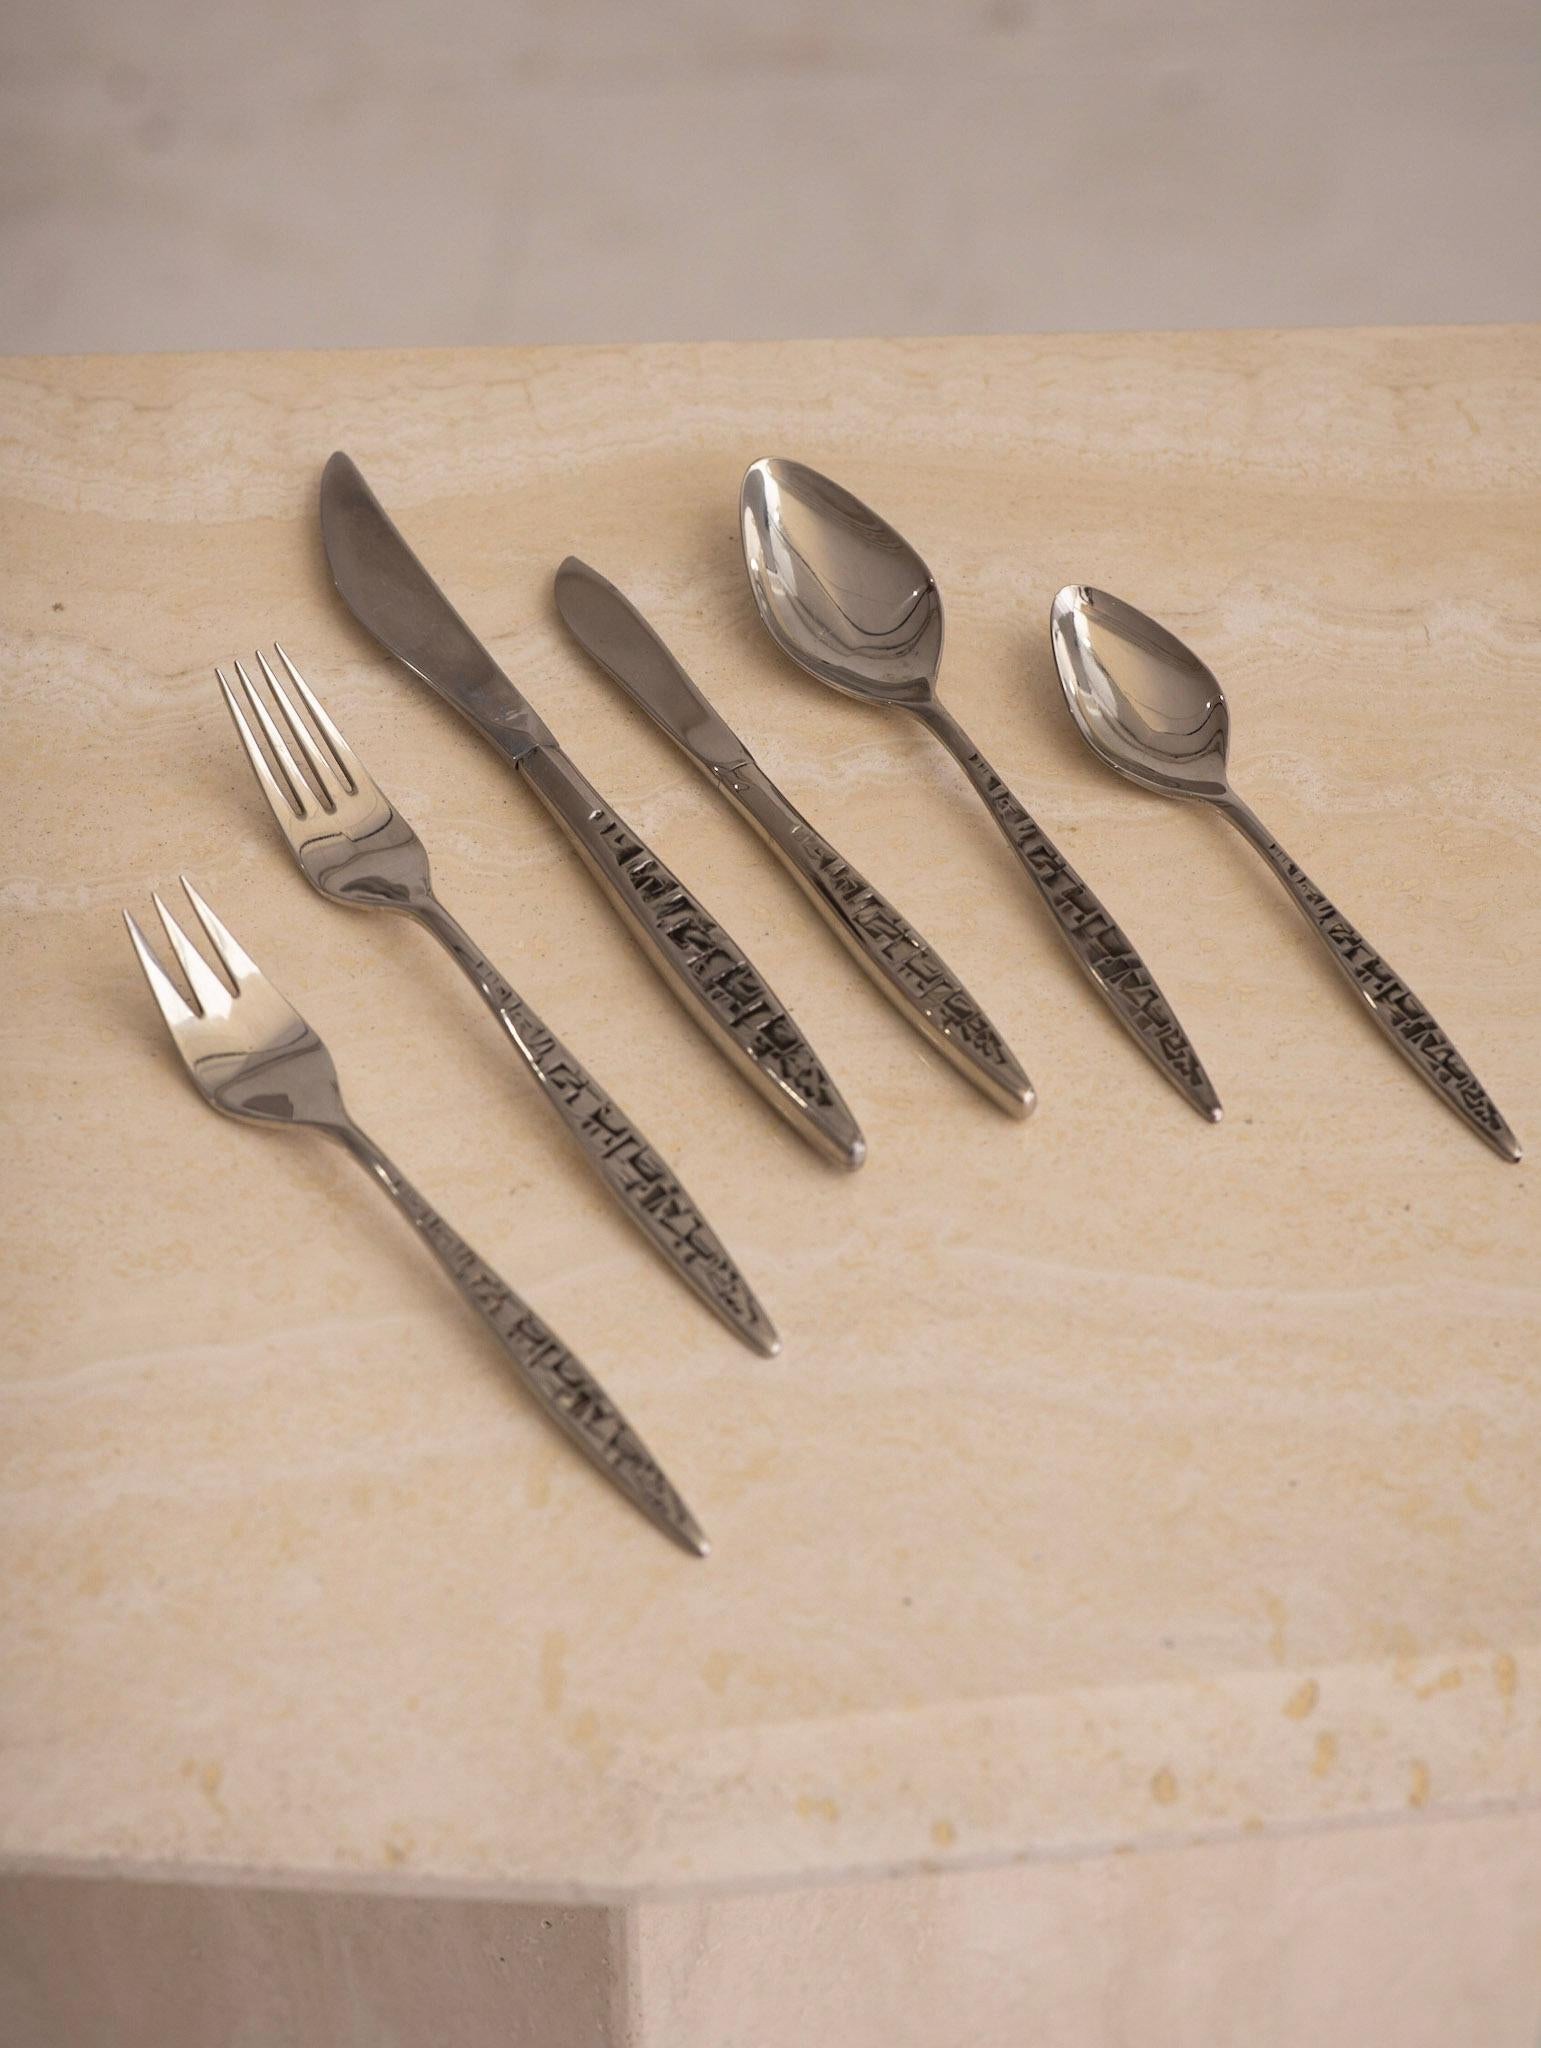 95 piece stainless steel flatware set by Lyon. Service for 12. Mid-century modern brutalist pattern. Measurements based on largest dinner fork.

Set includes:
7 large serving spoons
12 medium spoons
24 small spoons
12 dinner forks
12 salad